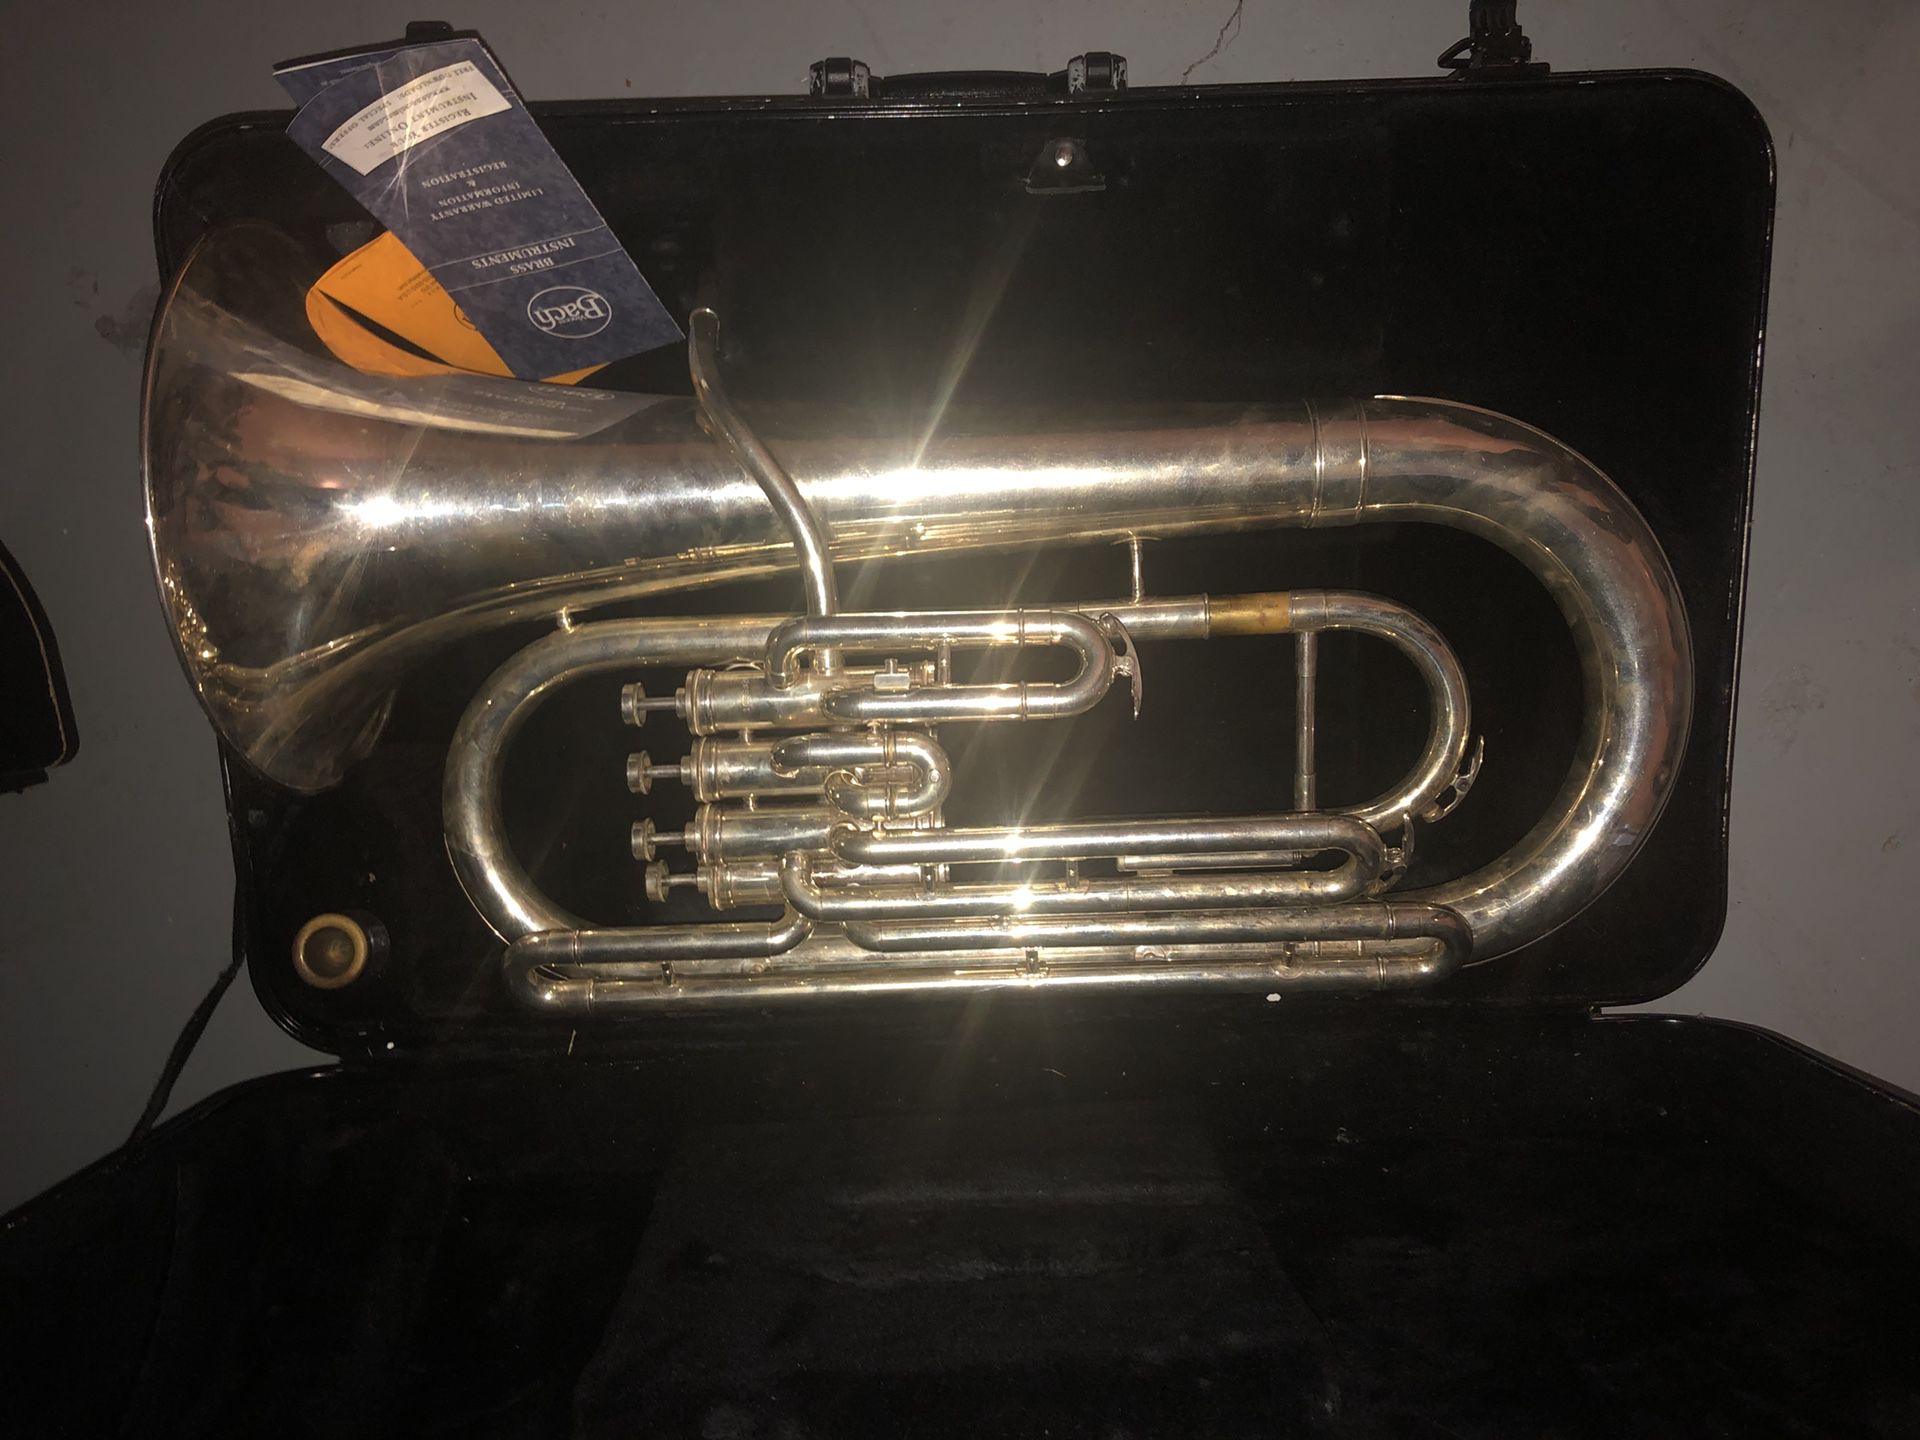 Bach b1110 Euphonium by Yamaha GREAT CONDITION EXCELLENT TONE.